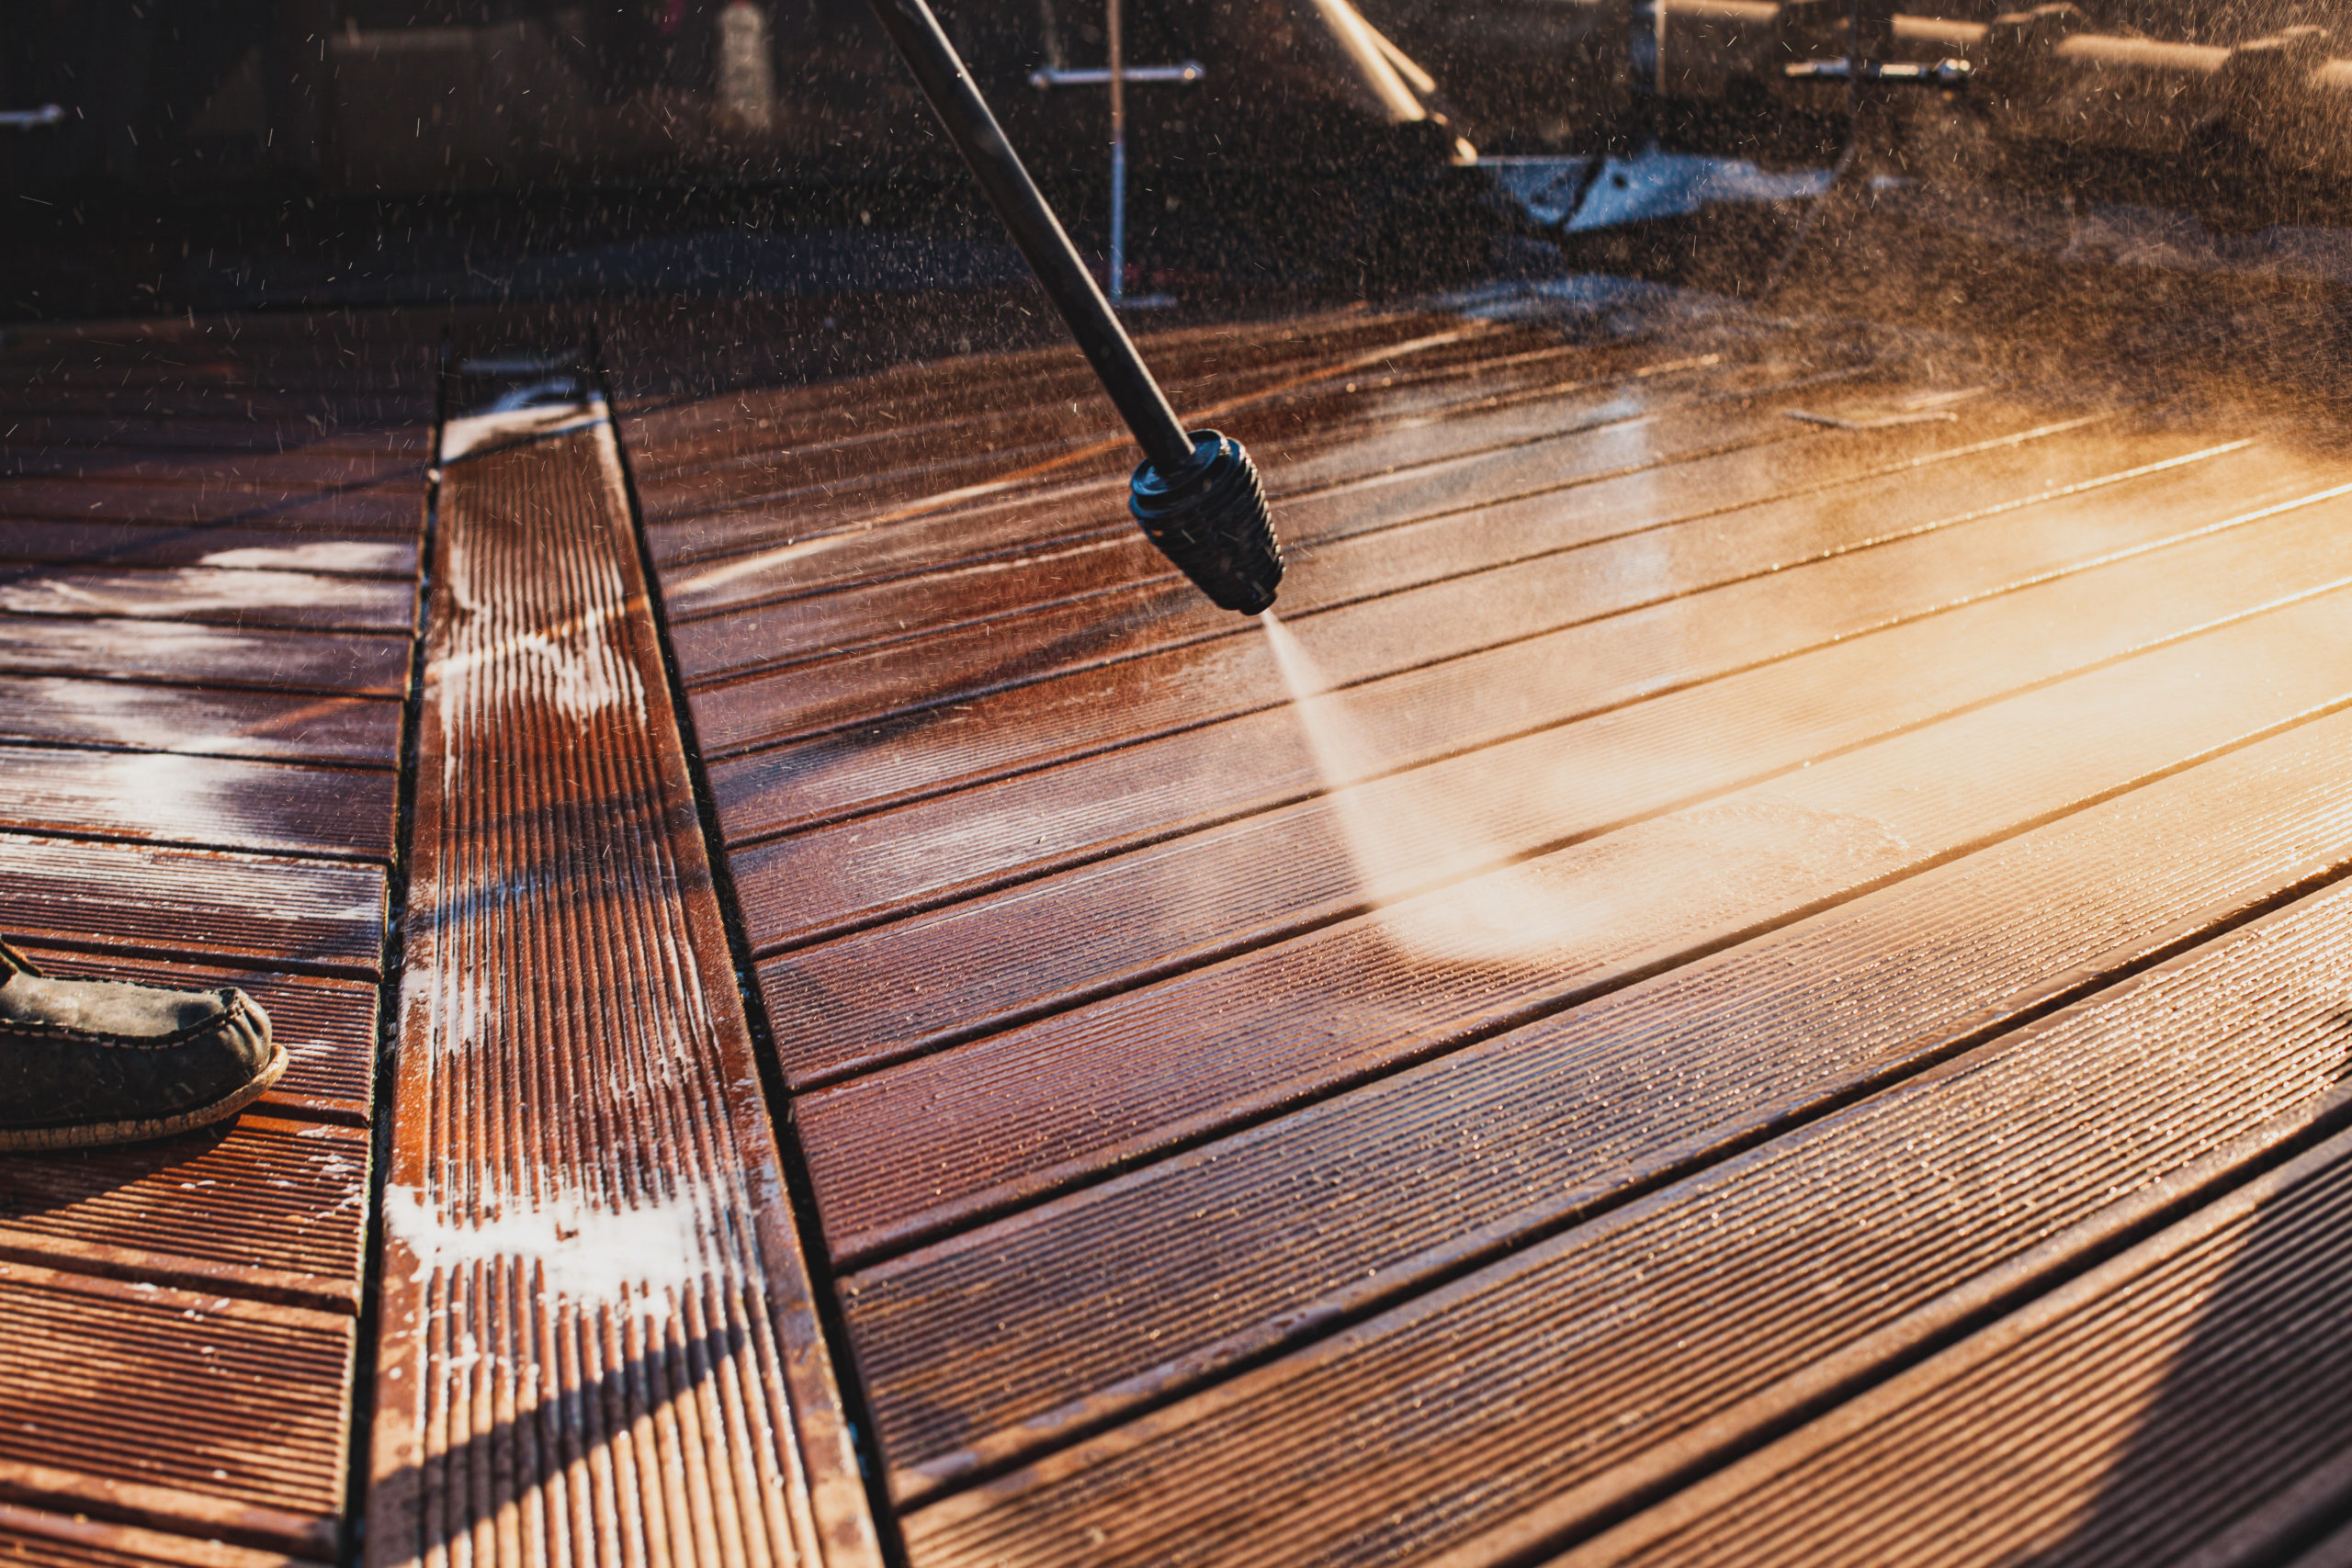 man cleaning terrace with a power washer – high water pressure cleaner on wooden terrace surface